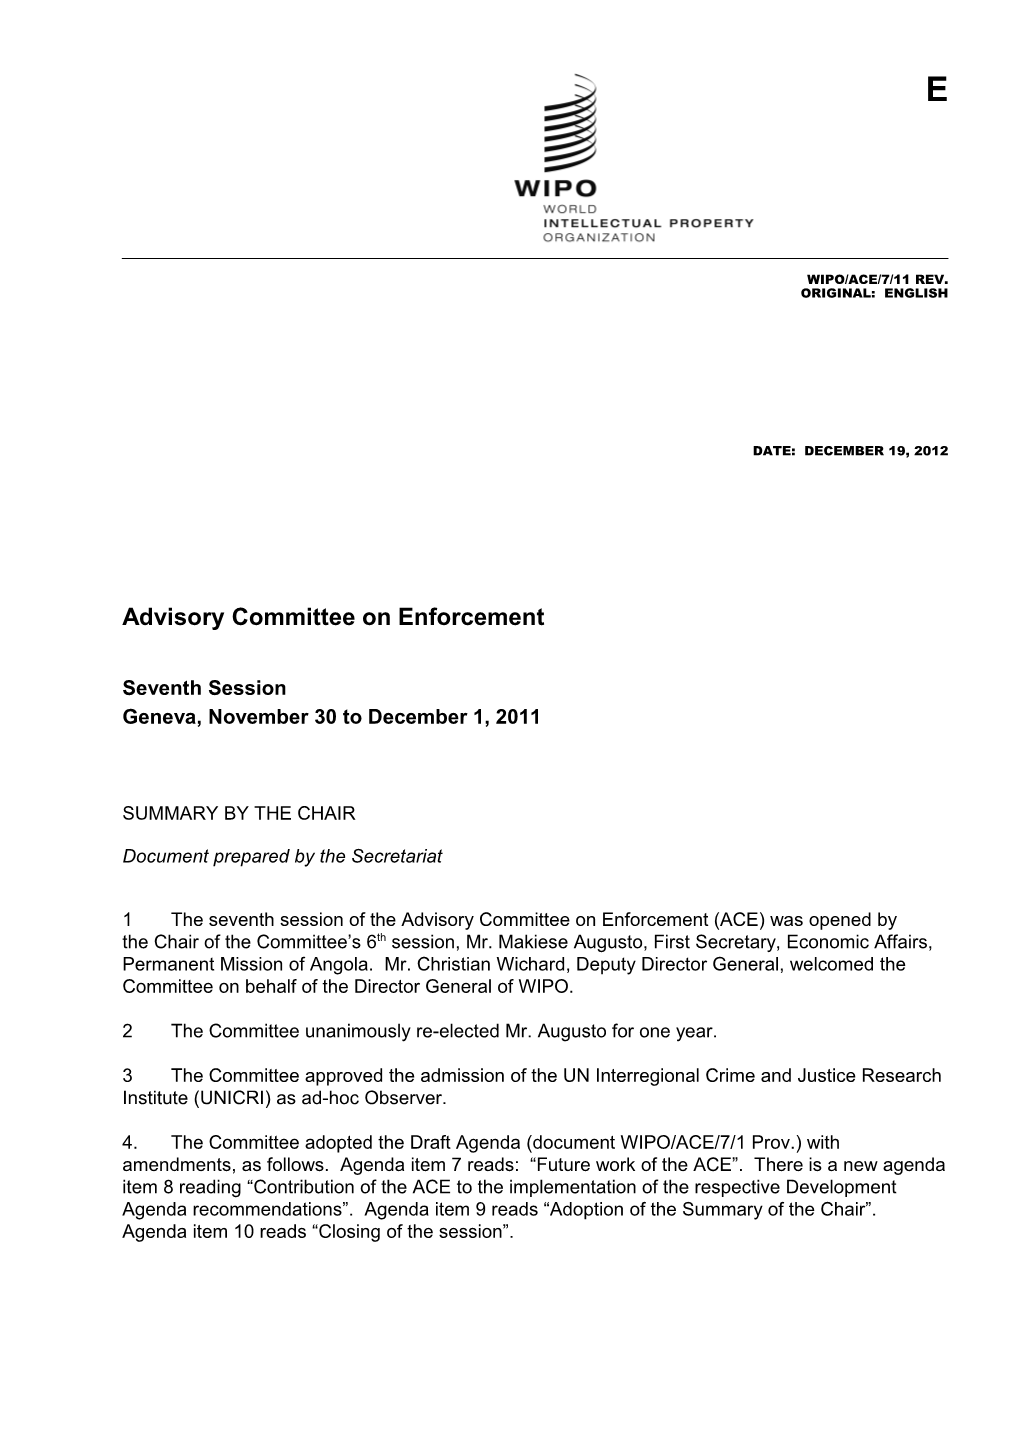 Advisory Committee on Enforcement s1